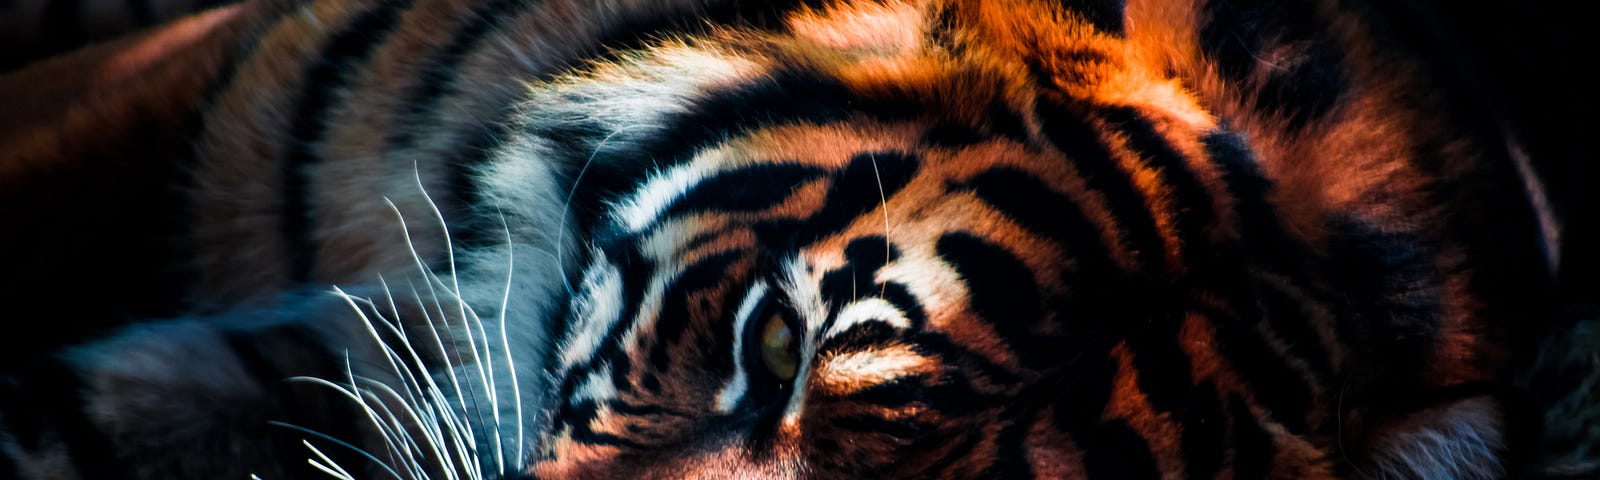 headshot of a tiger, lying on his side